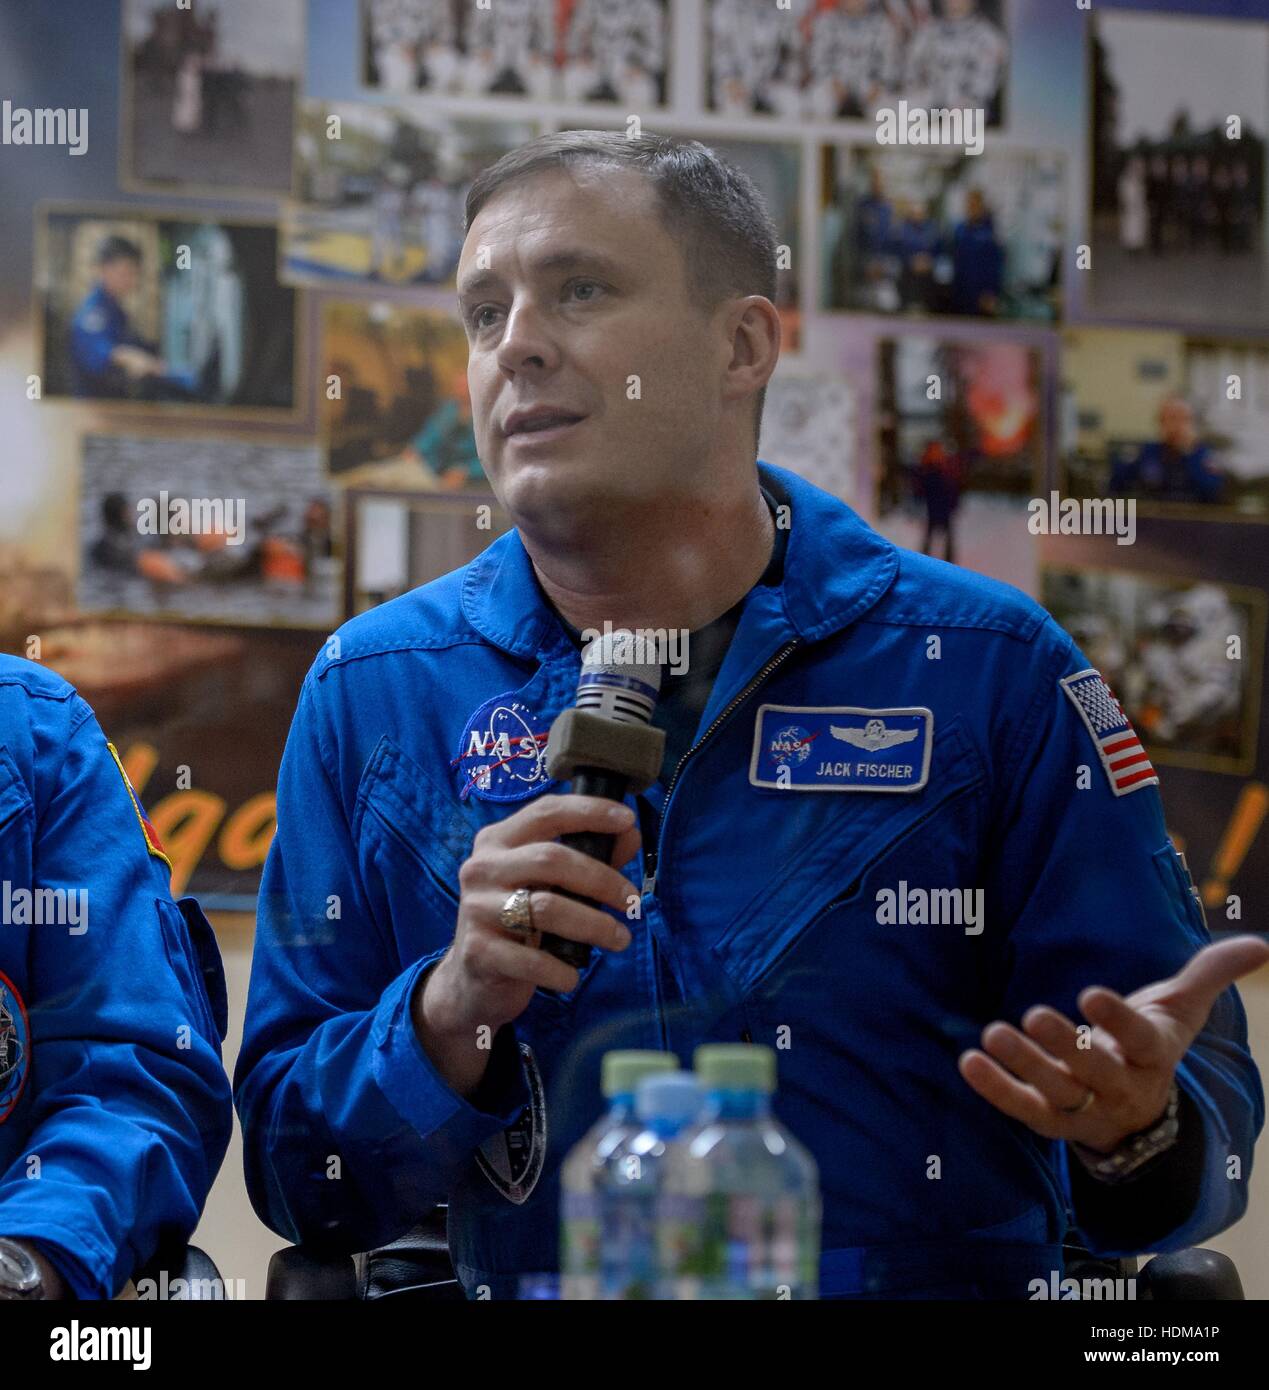 NASA International Space Station Expedition 50 backup crew astronaut Jack Fischer attends a press conference from behind glass in quarantine at the Cosmonaut Hotel November 16, 2016 in Baikonur, Kazakhstan. Stock Photo